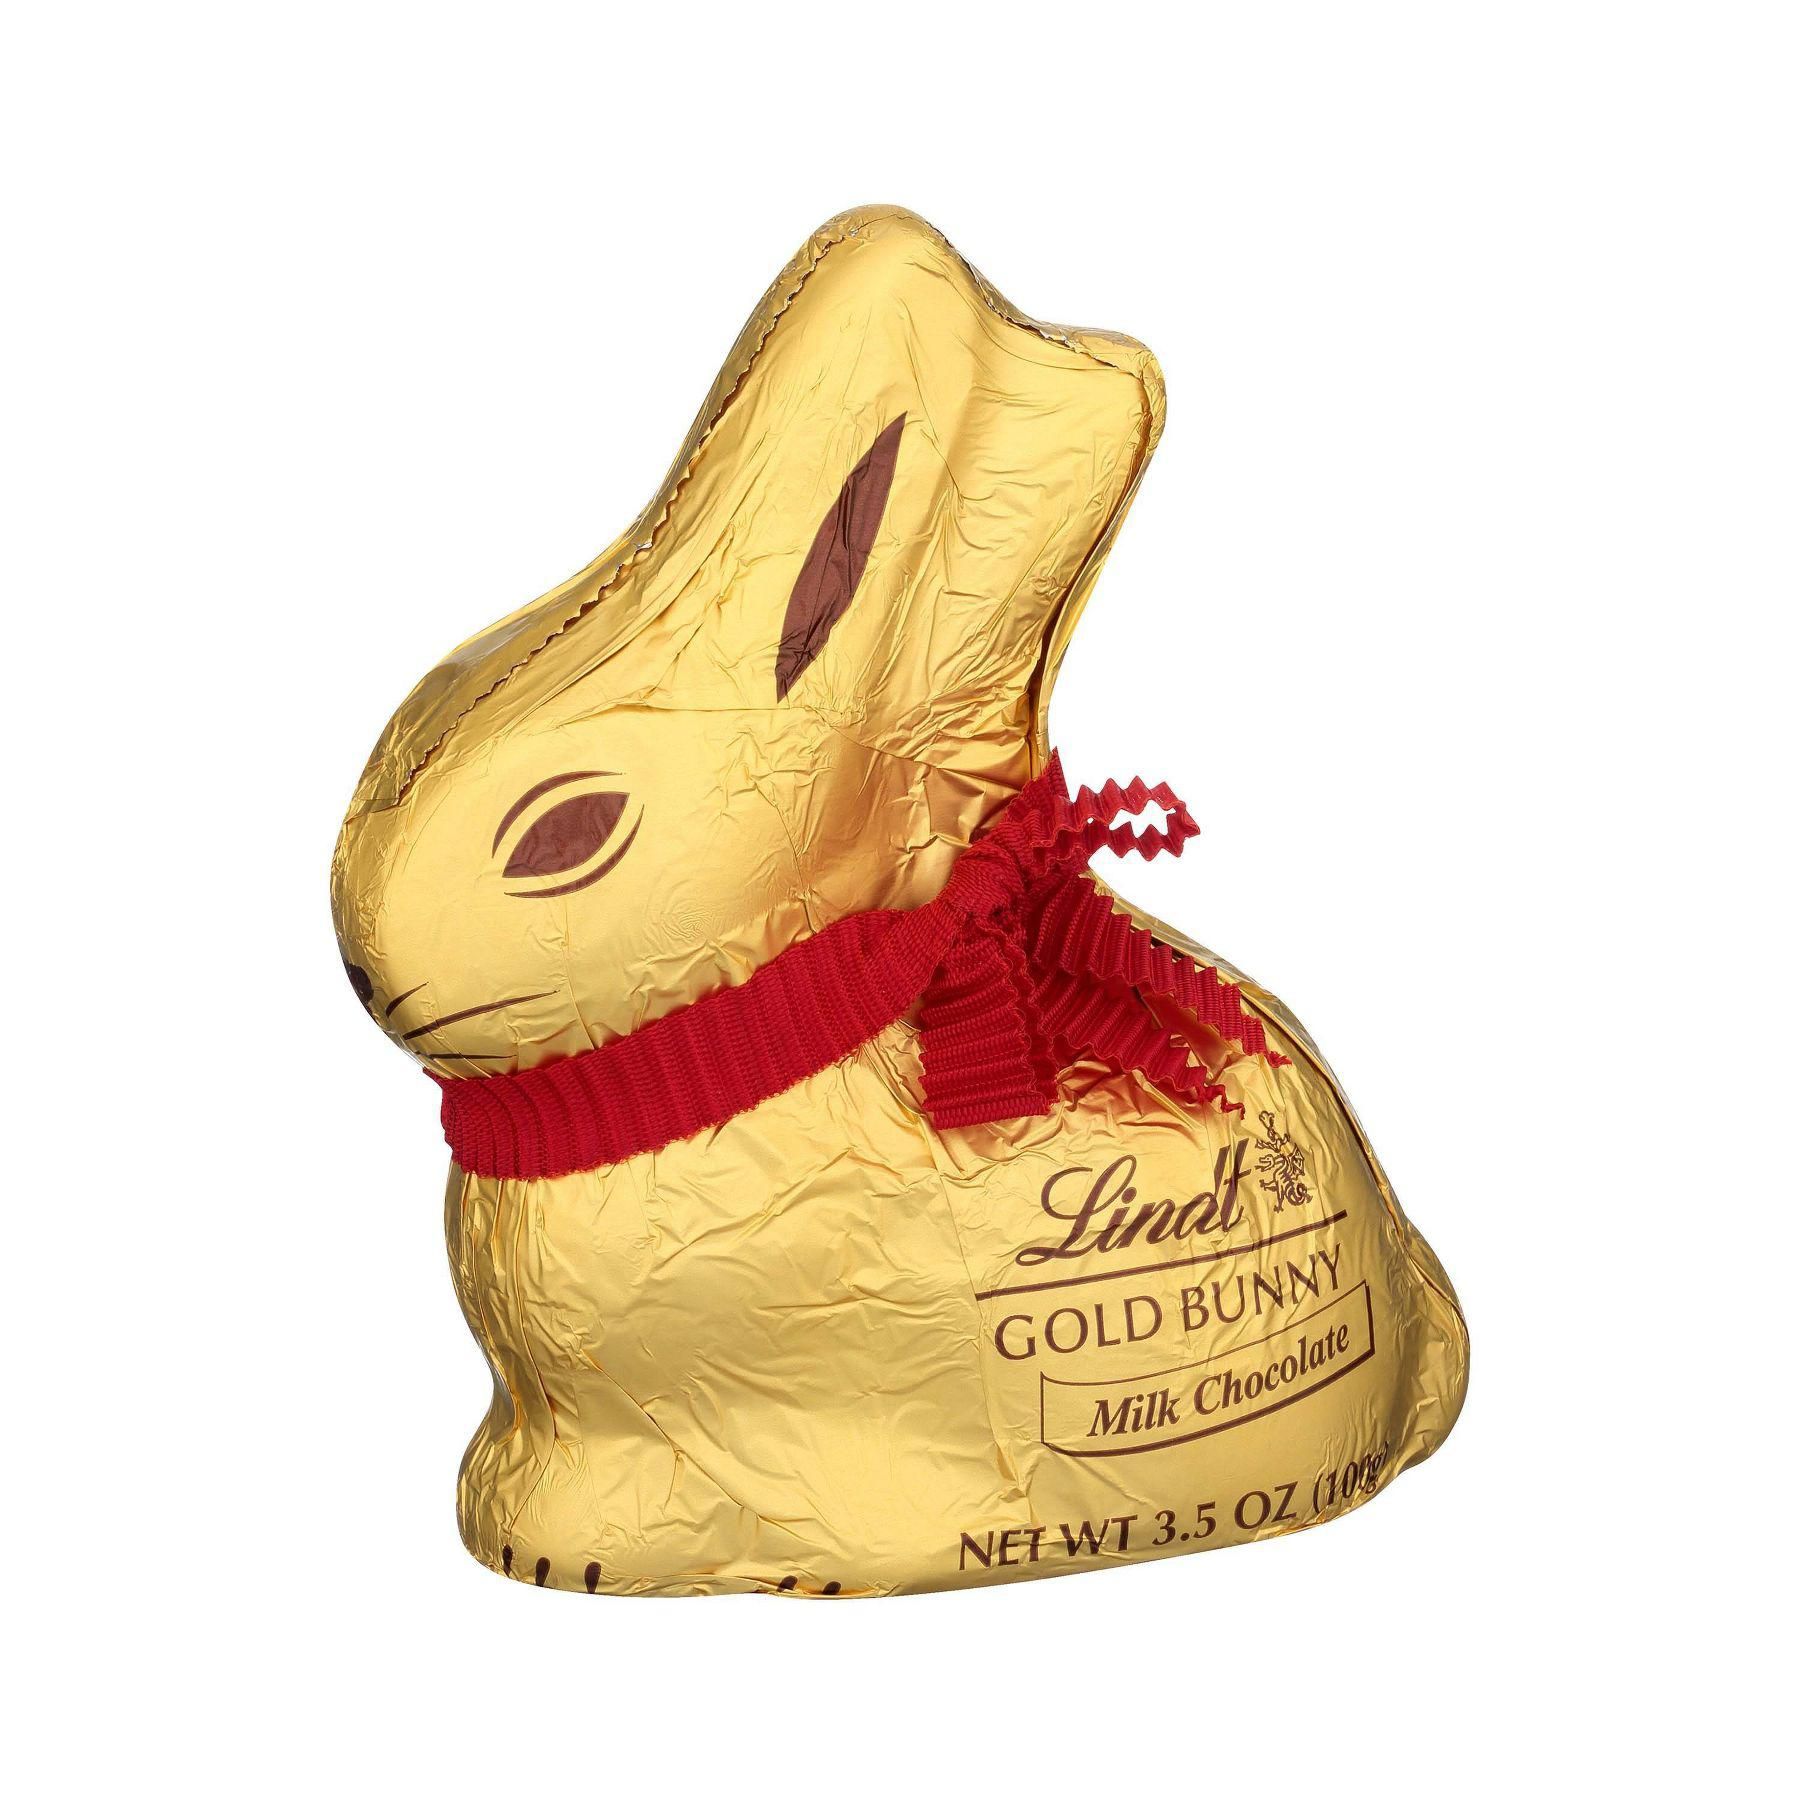 Lindt Easter Milk Chocolate Gold Bunny